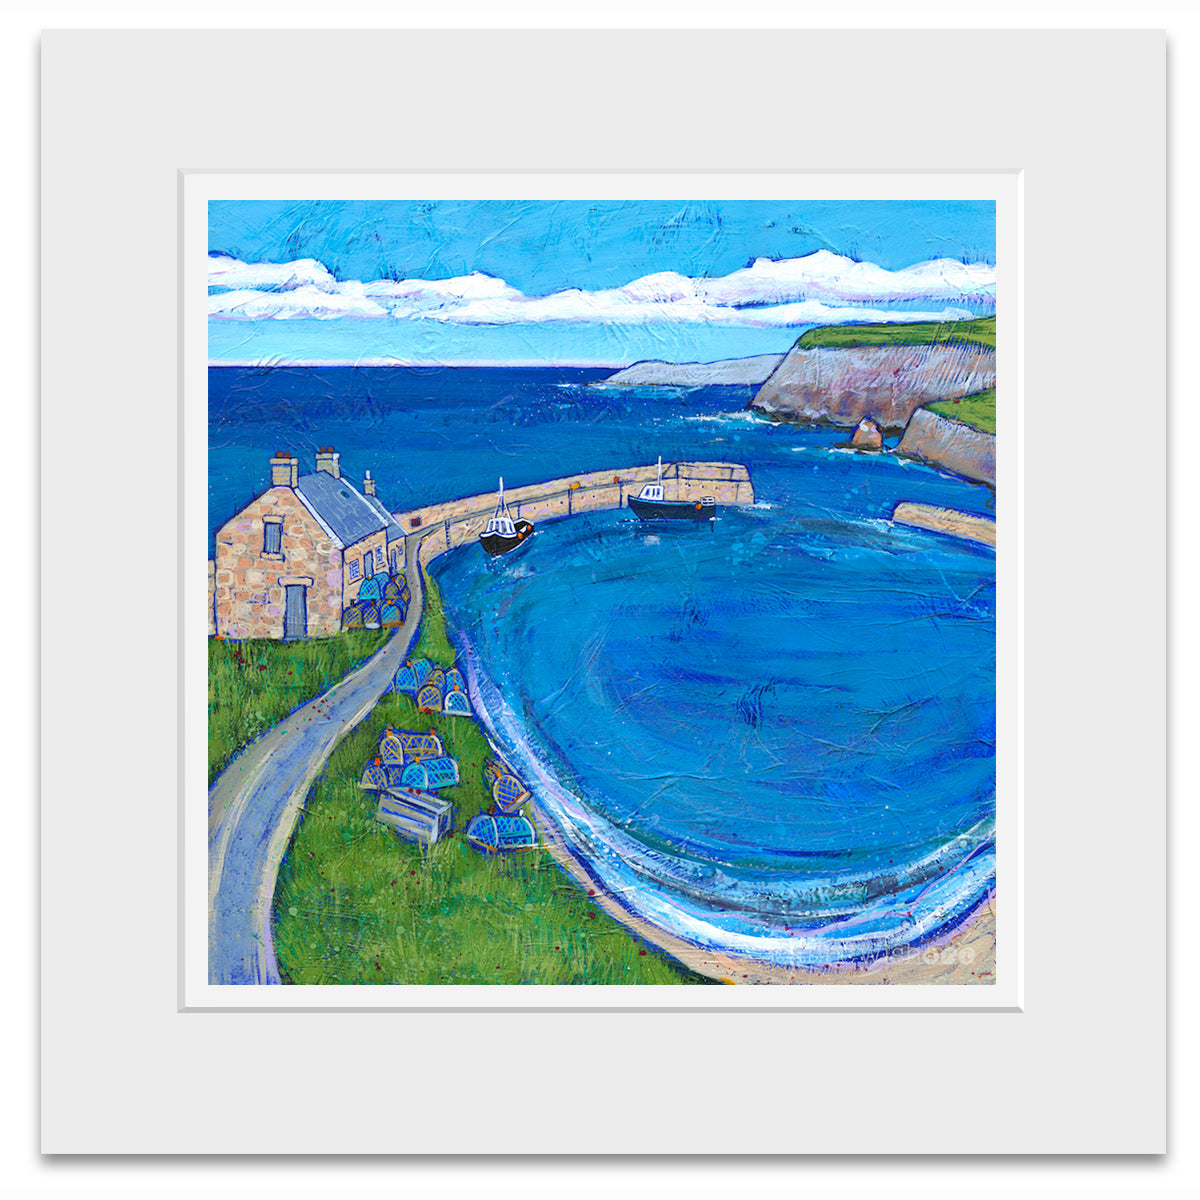 A mounted print of Cove harbour in Scotland.